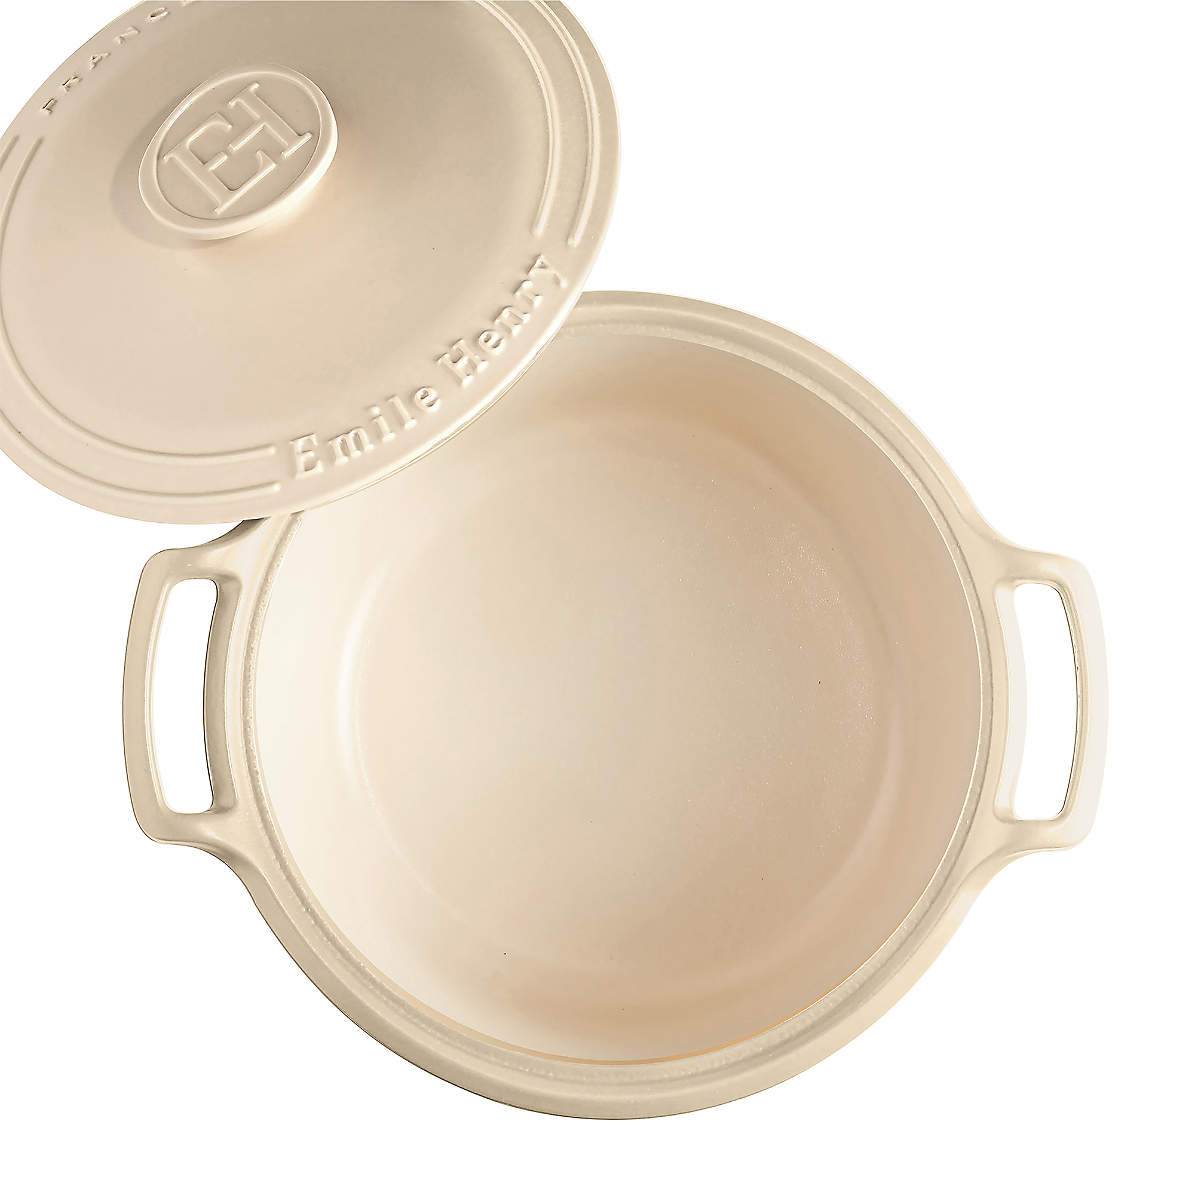 Emile Henry 7qt Dutch oven - household items - by owner